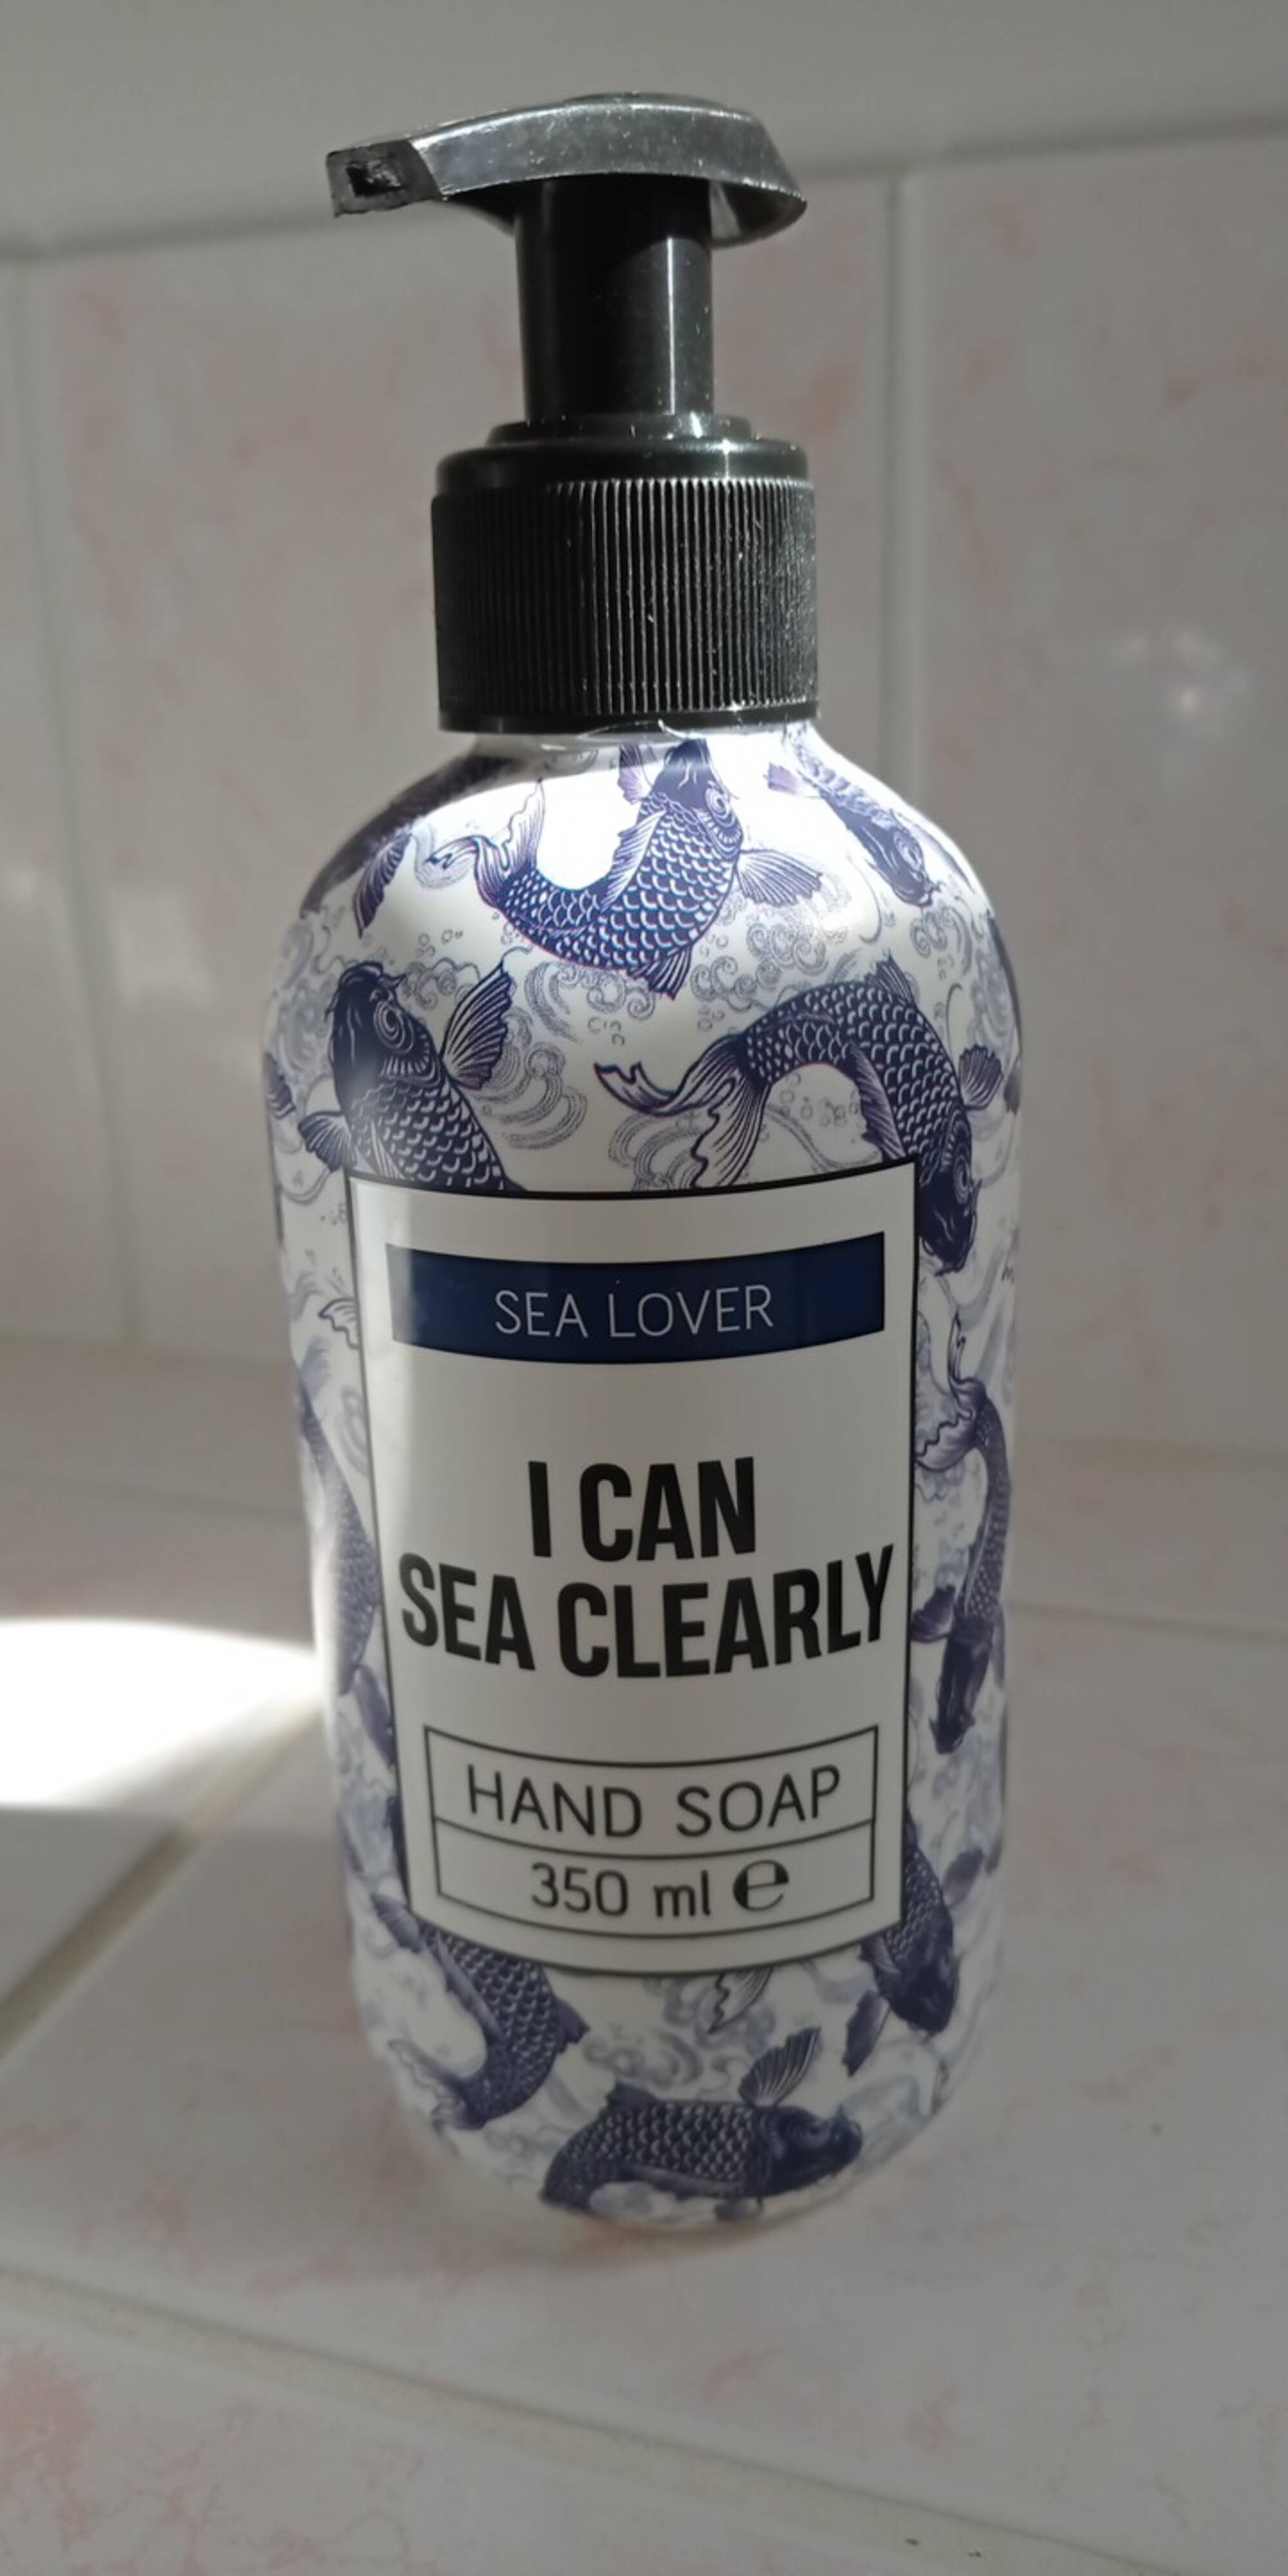 MAXBRANDS MARKETING B.V. - I can sea clearly - Hand soap 